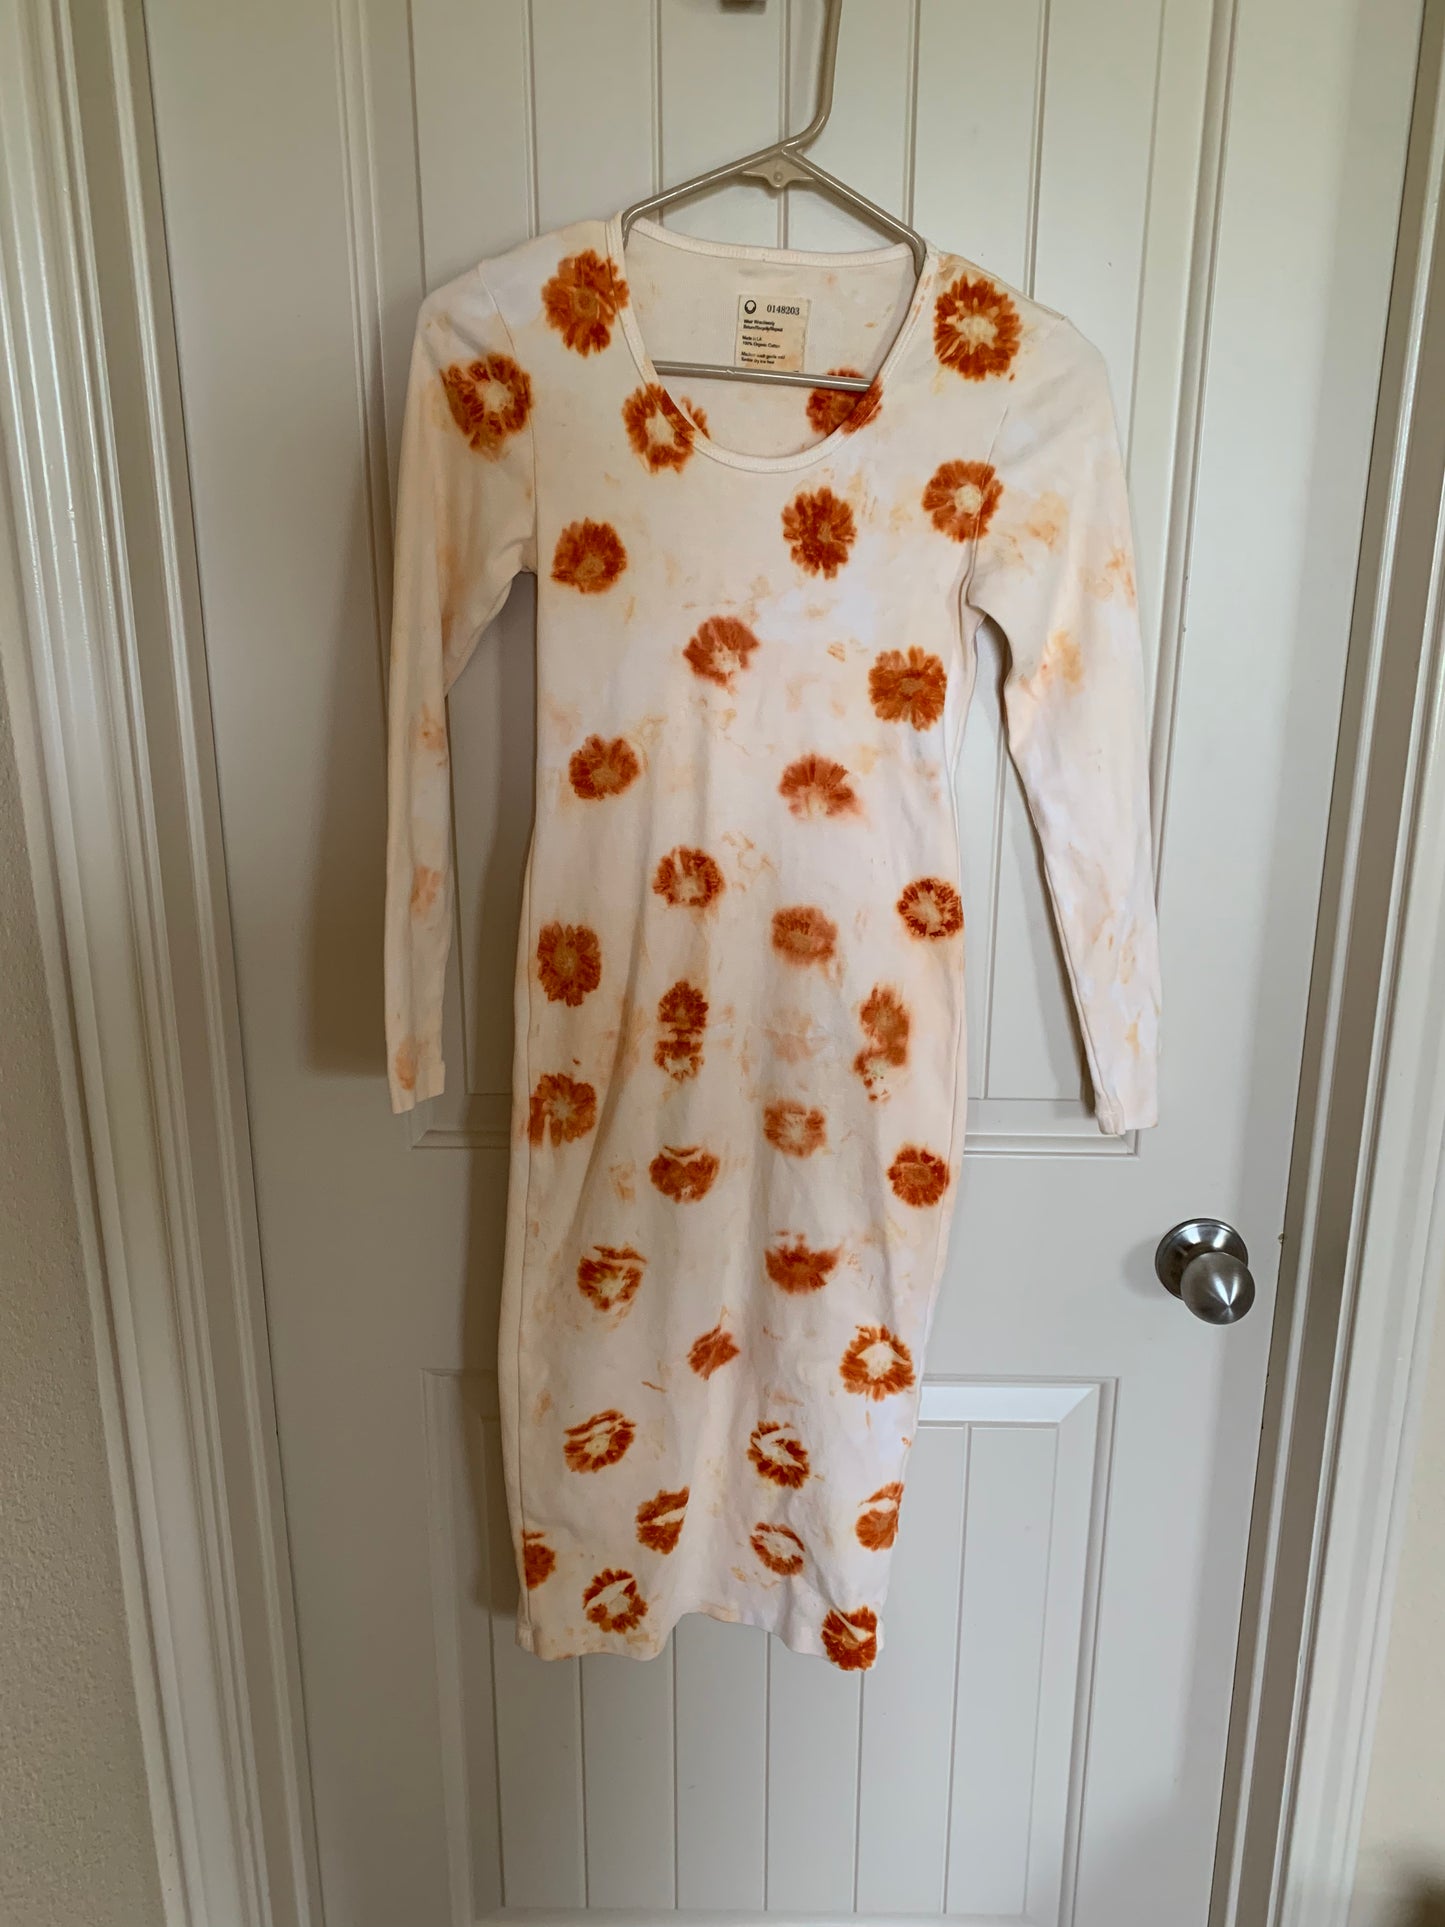 For Days Date night Flower pressed dress size XS